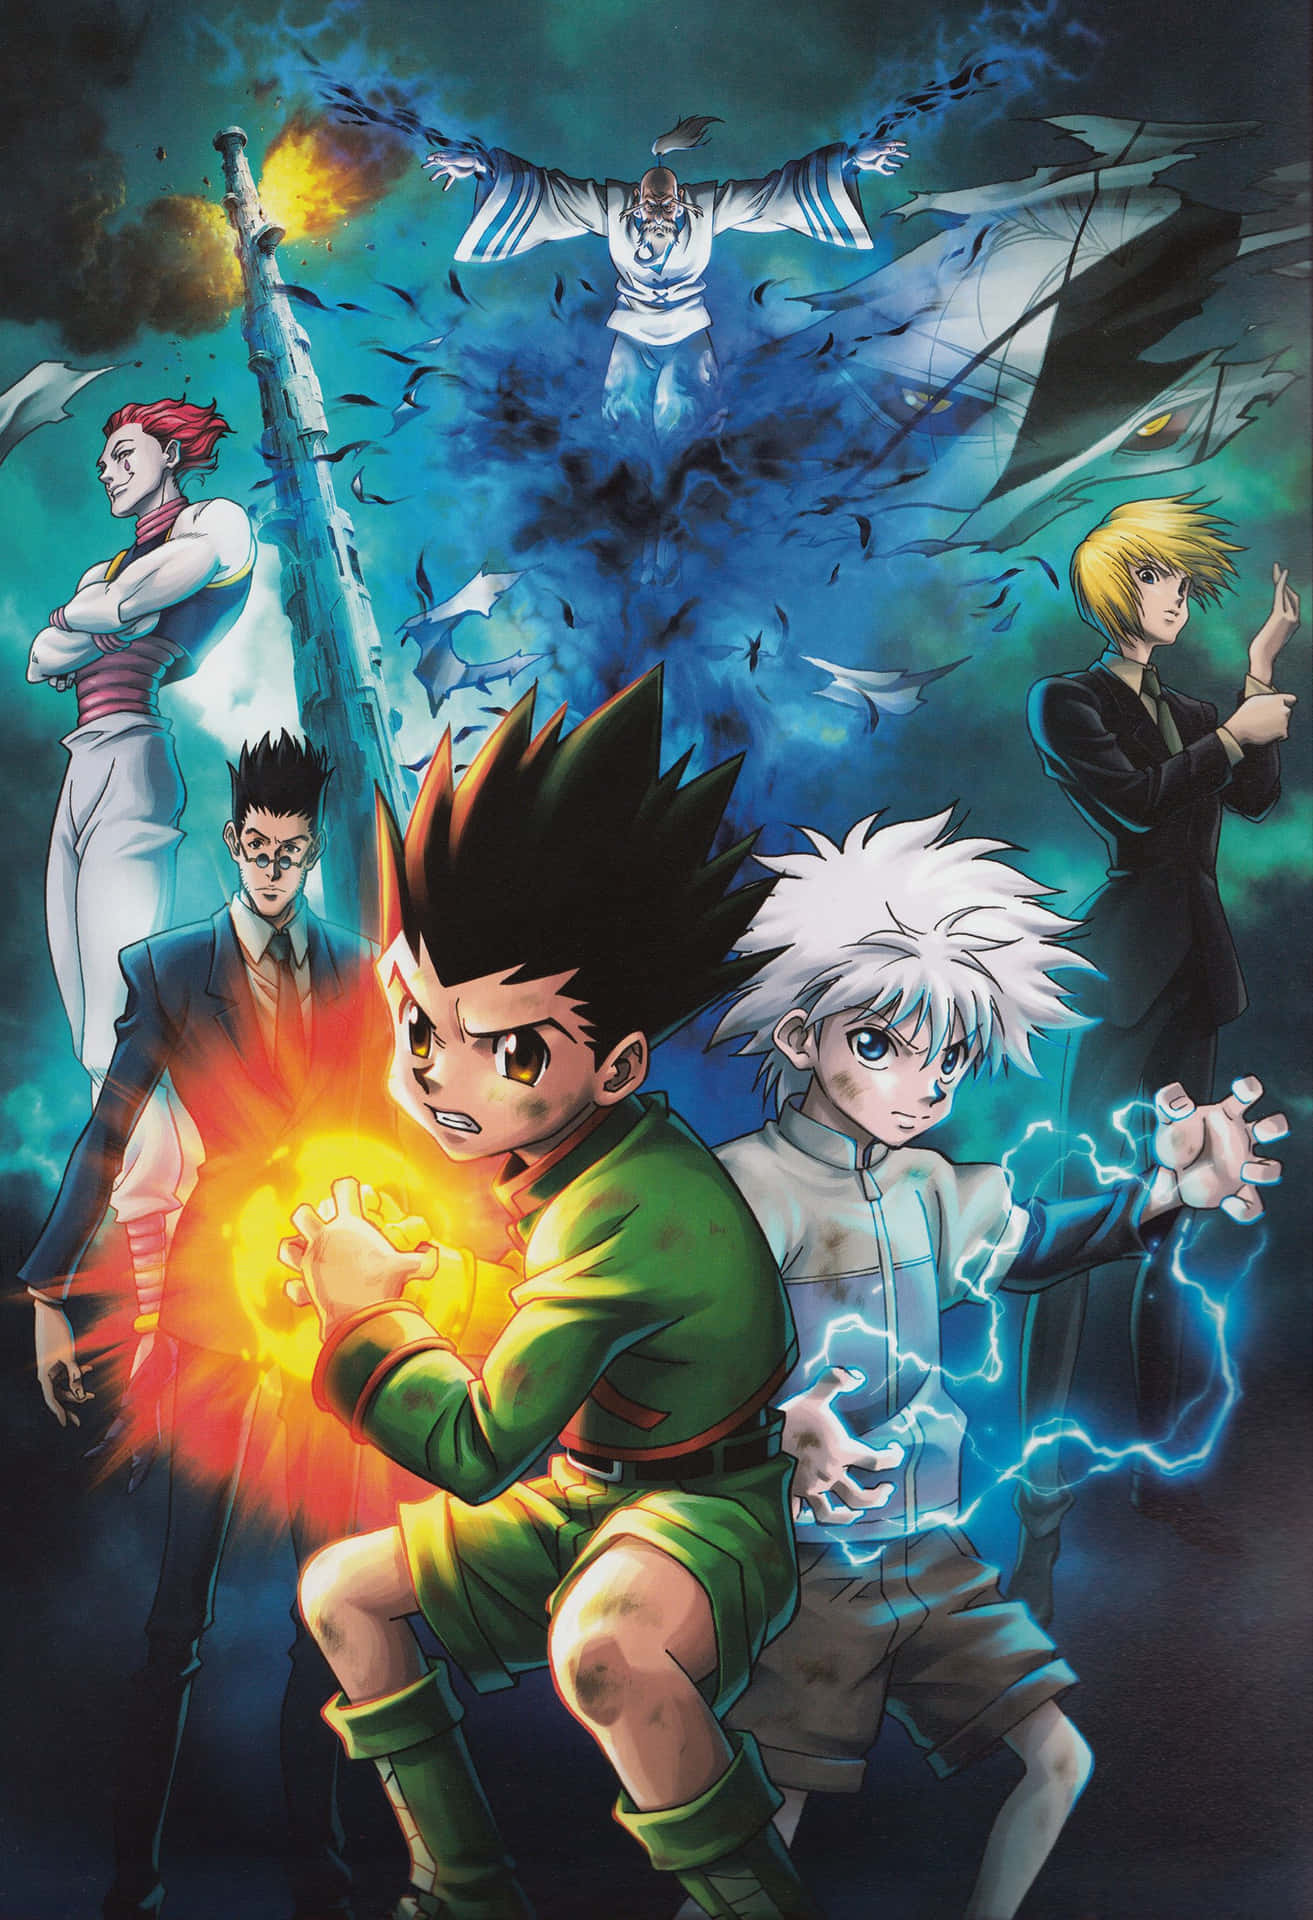 Leorio Paradinight - The Ambitious Doctor and Hunter Wallpaper